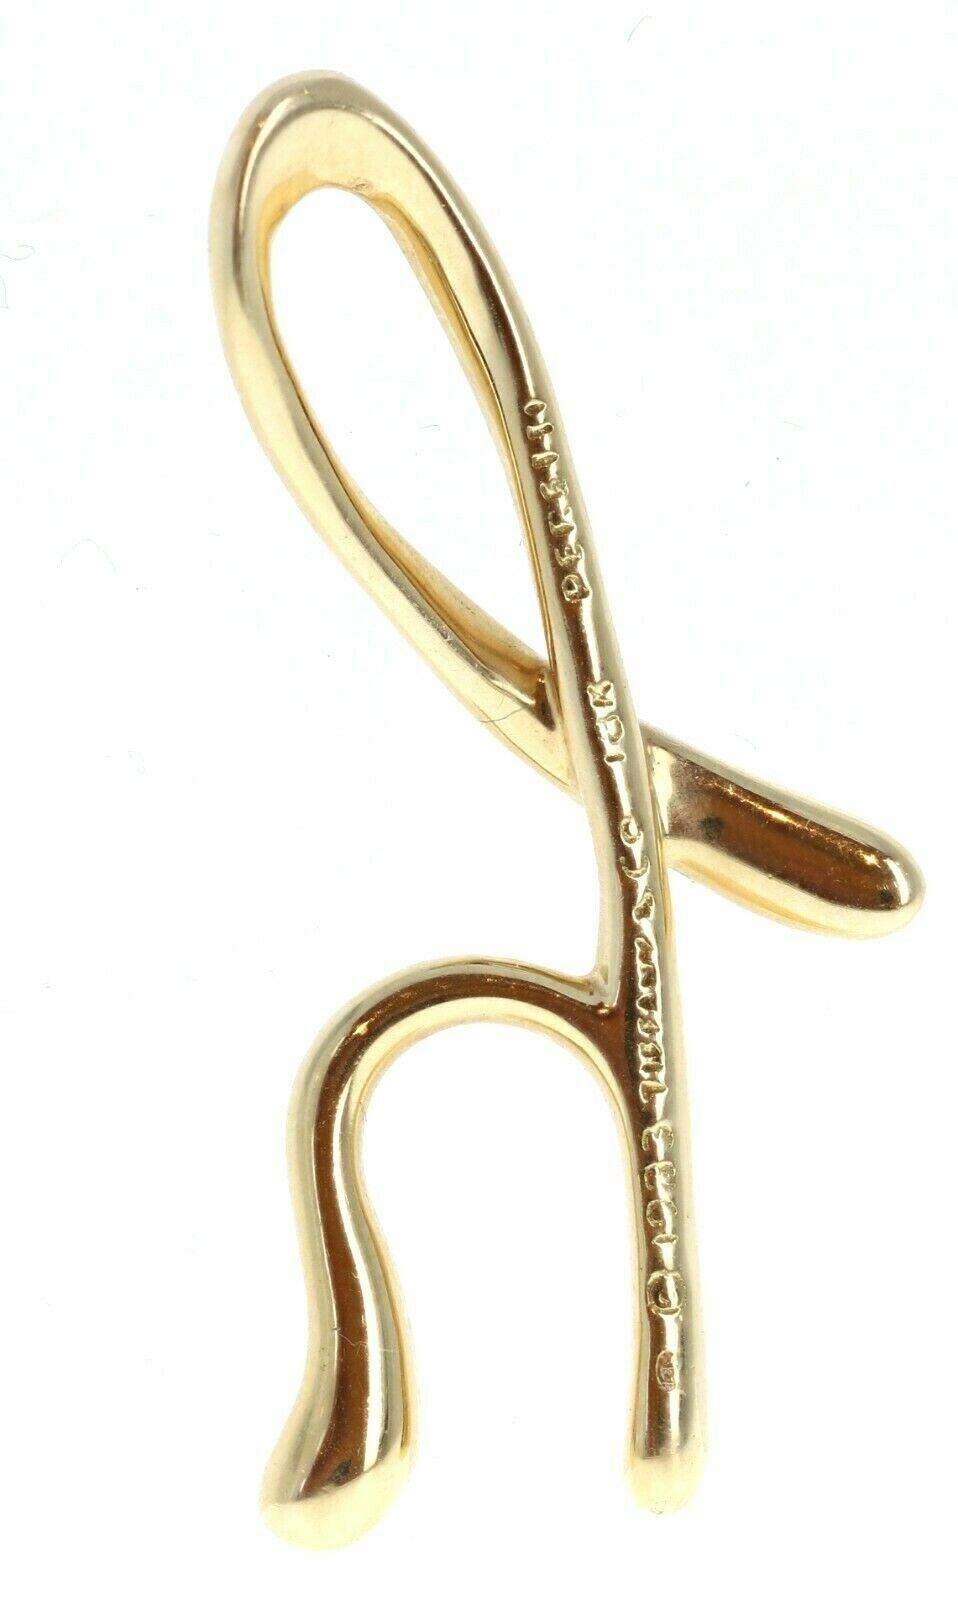 Tiffany & Co 18k Yellow Gold Elsa Peretti Initial Letter H Pendant 13.3g


For sale is a 18k yellow gold T& Co by Elsa Peretti 